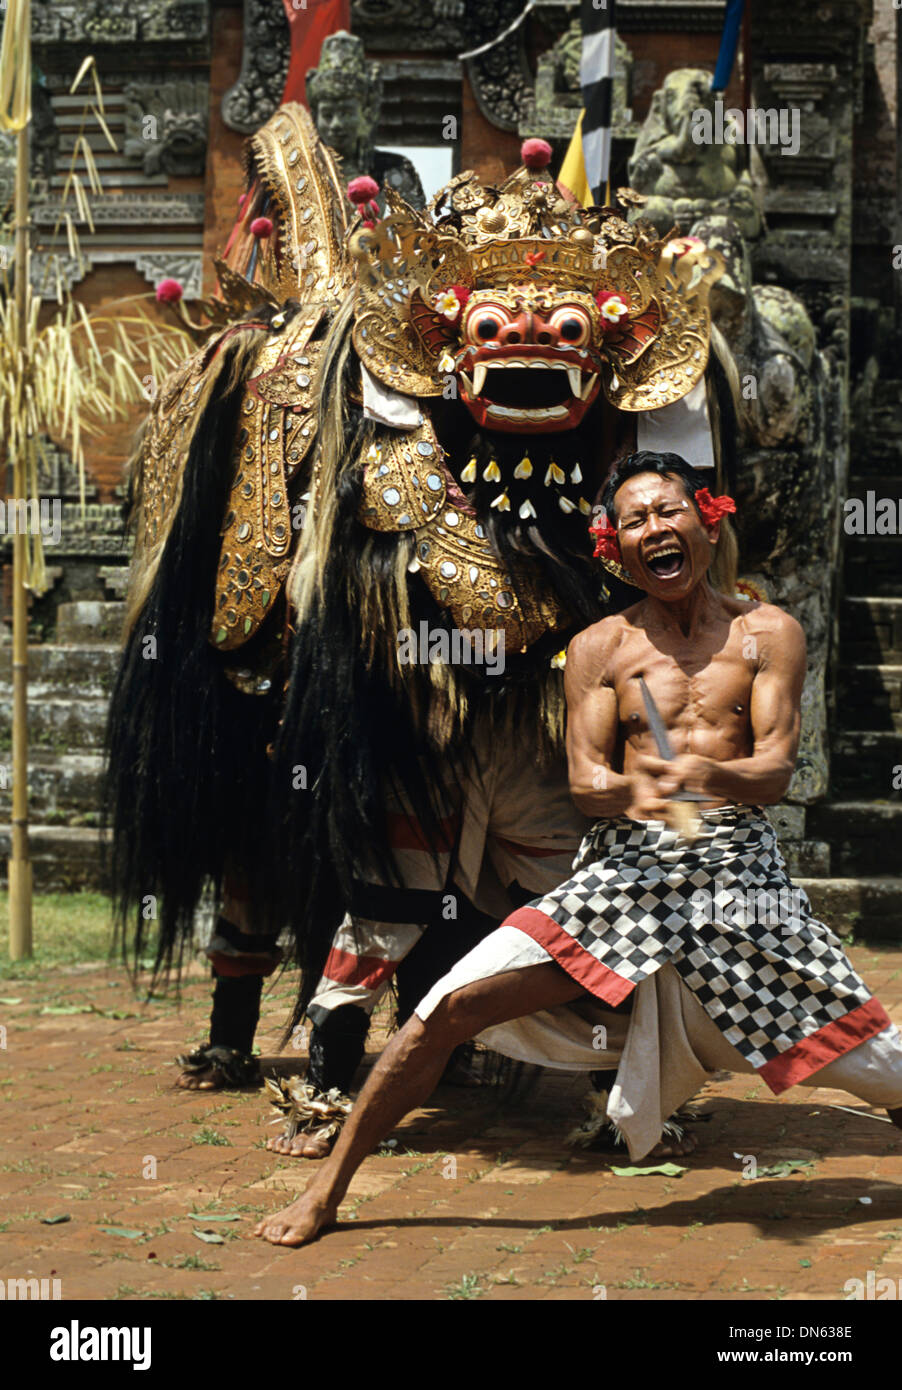 Performance of a Barong show (Ramayana story, traditional dances and music), Bali, Indonesia Stock Photo